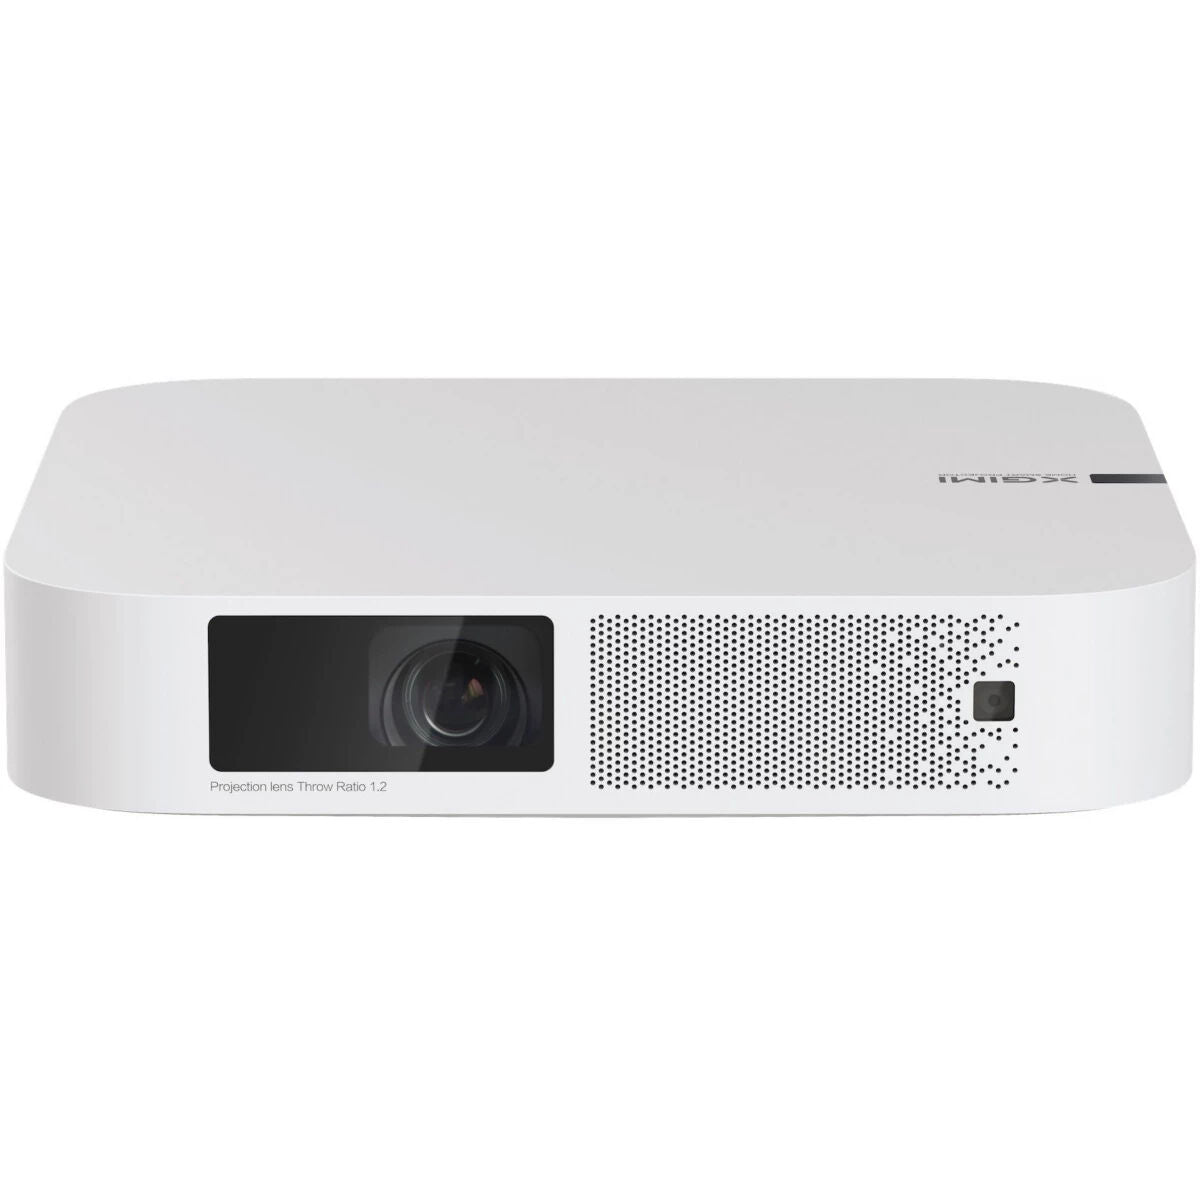 Projector Xgimi Elfin  Full HD 1080 p 800 lm 1080 px, Xgimi, Electronics, TV, Video and home cinema, projector-xgimi-elfin-full-hd-1080-p-800-lm-1080-px, Brand_Xgimi, category-reference-2609, category-reference-2642, category-reference-2947, category-reference-t-18805, category-reference-t-19653, cinema and television, computers / peripherals, Condition_NEW, entertainment, office, Price_500 - 600, RiotNook